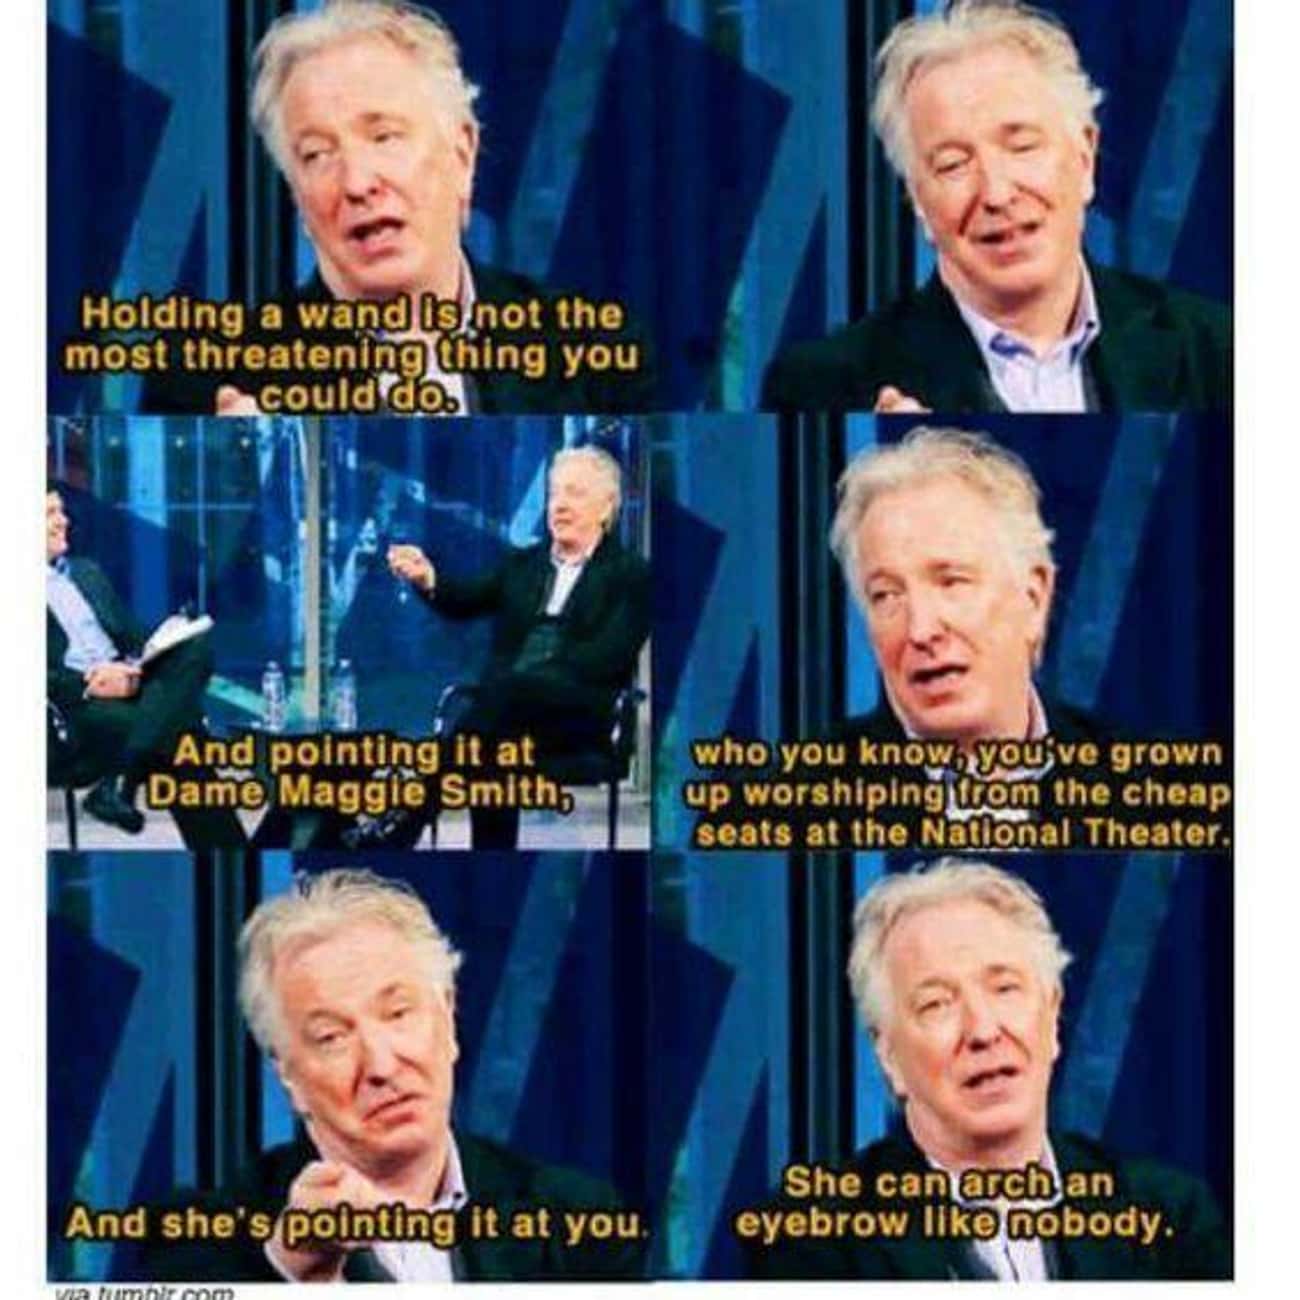 Alan Rickman Loves Maggie Smith's Arched Eyebrow